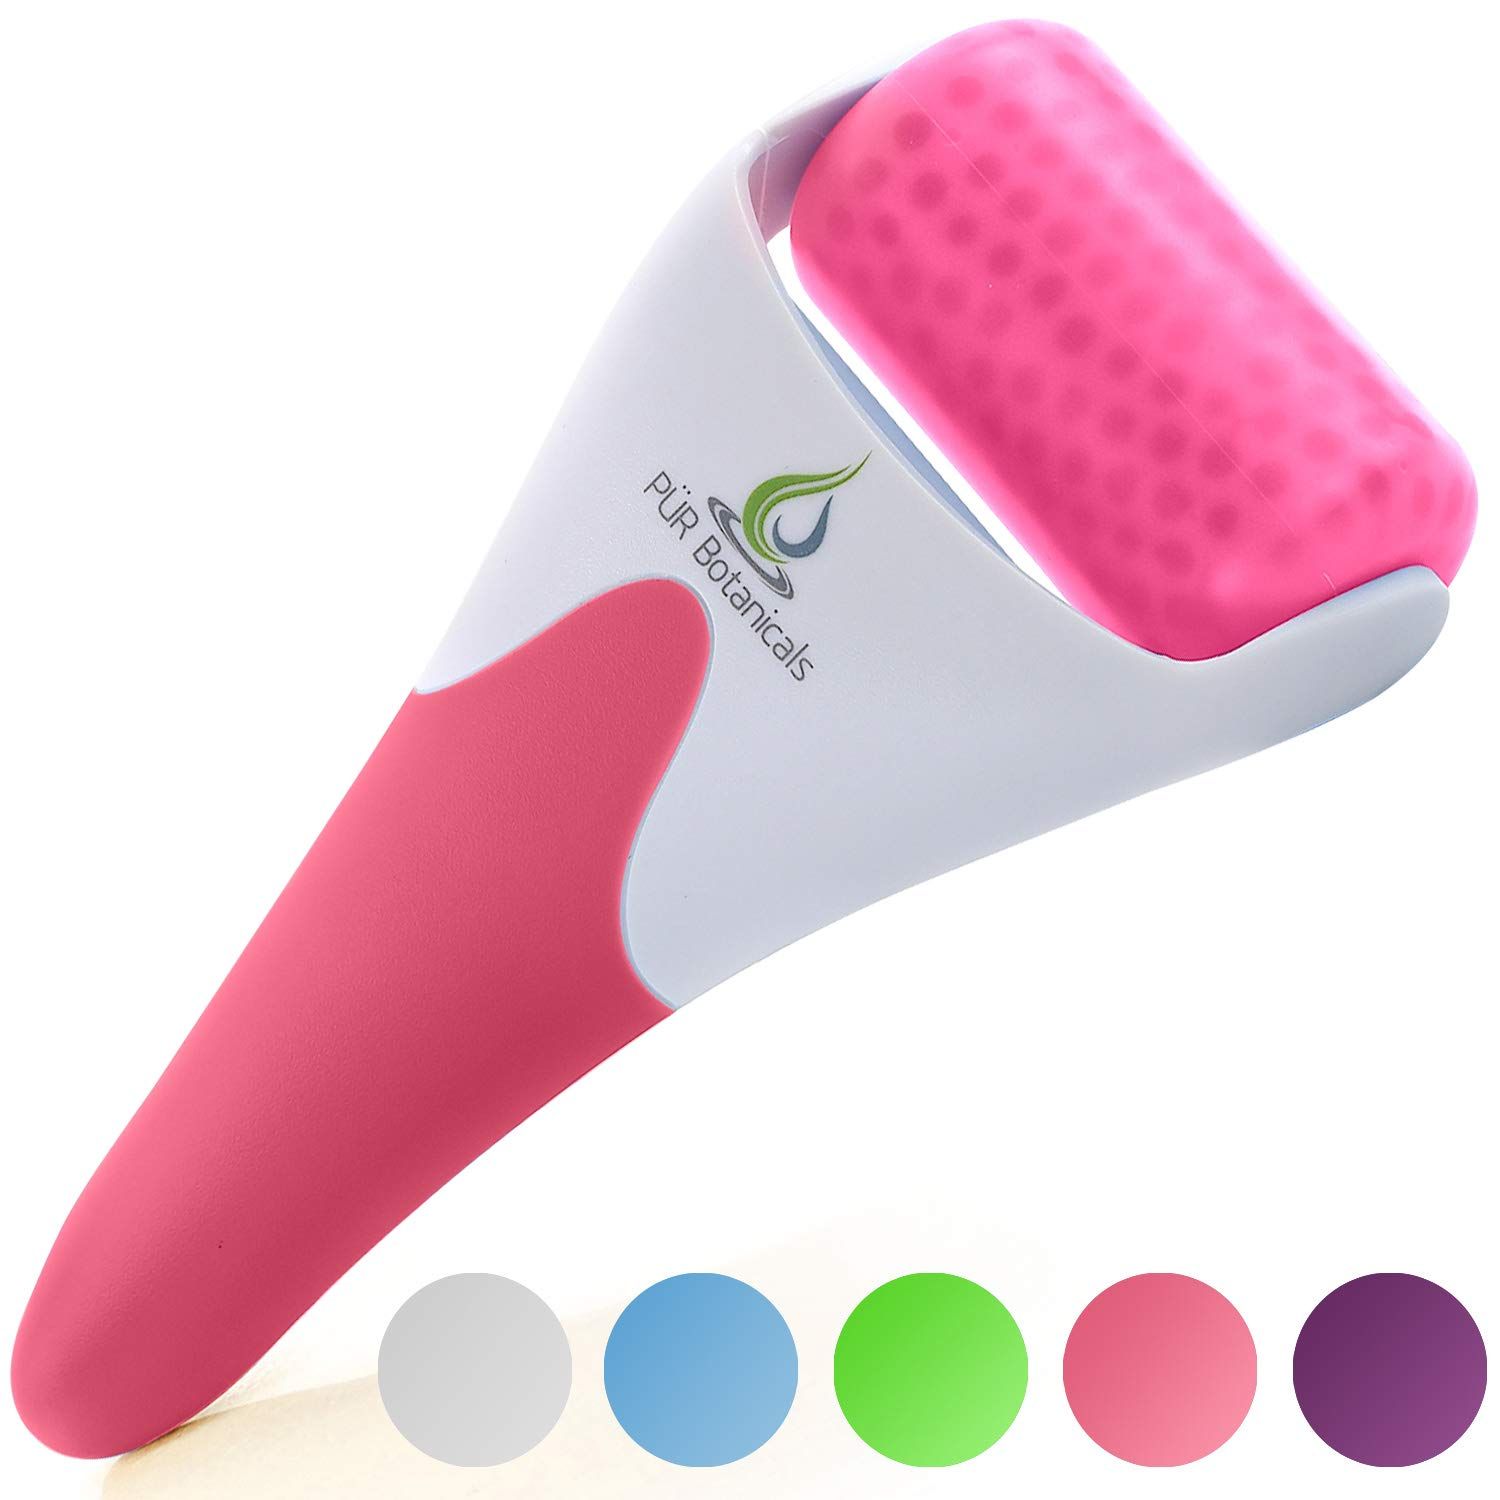 Ice Roller Face Massager - Therapeutic Cooling to Naturally Tone & Tighten | Brighten Complexion ... | Amazon (US)